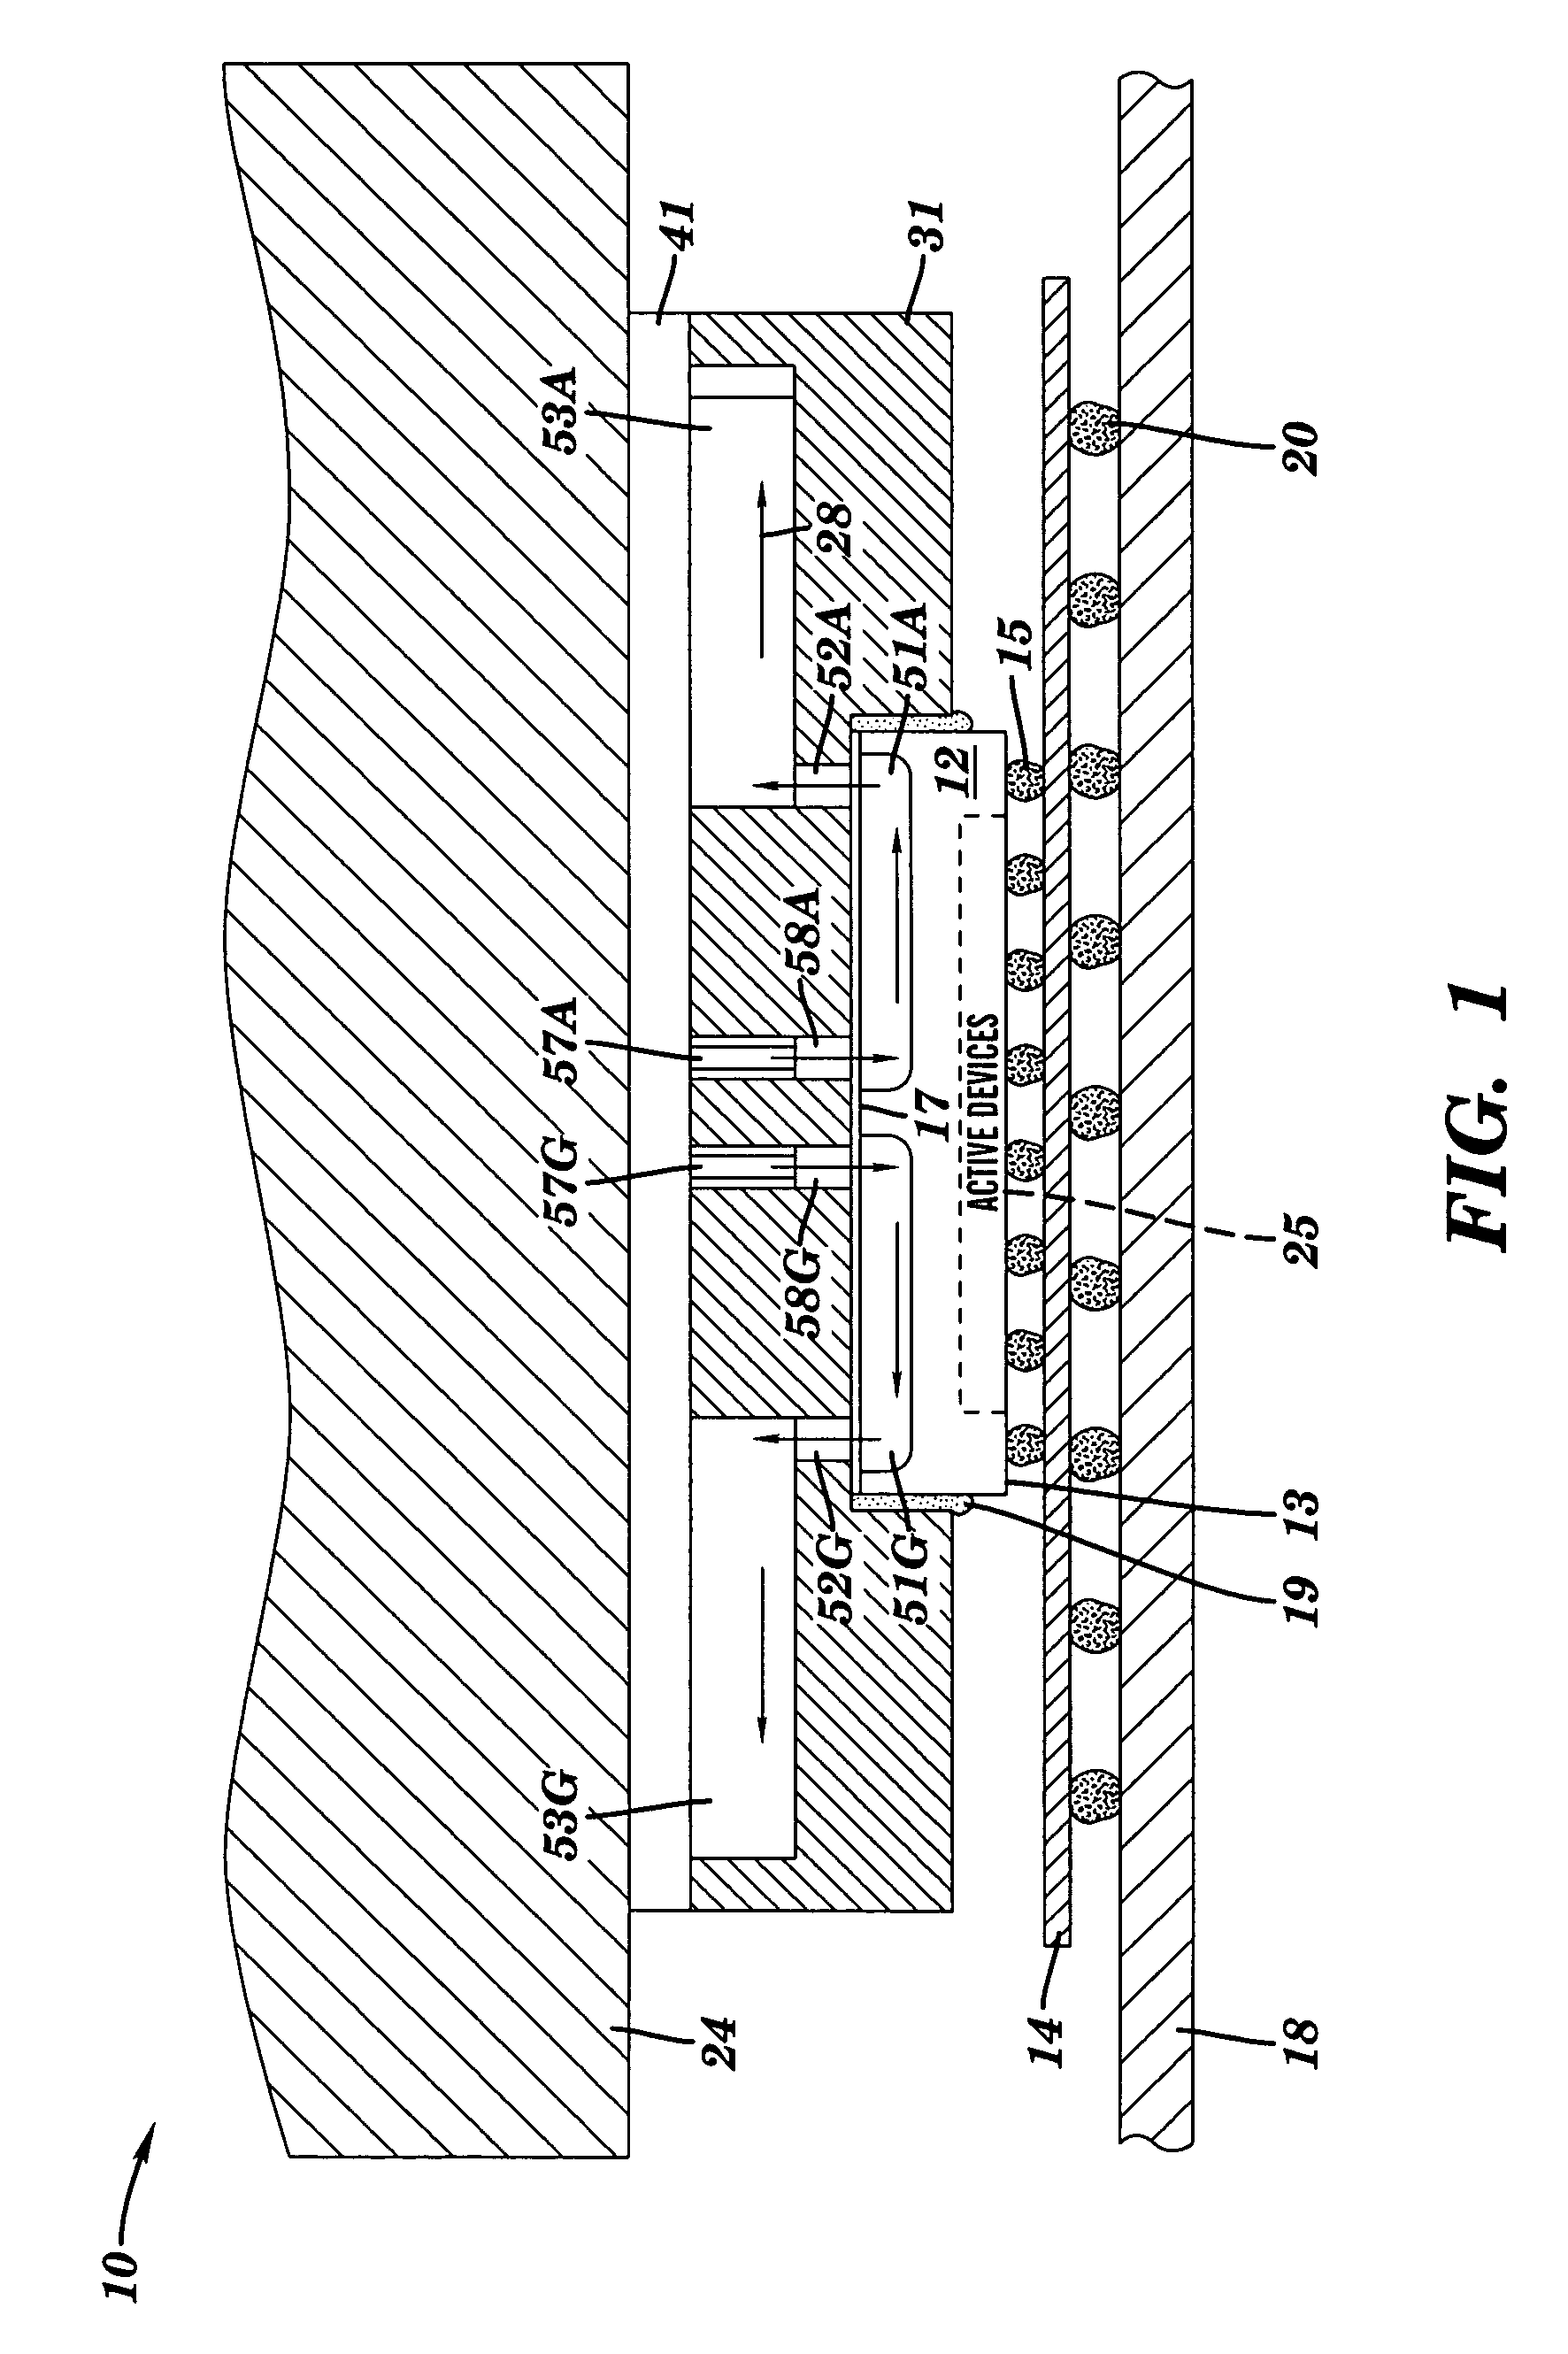 Cooling of substrate using interposer channels